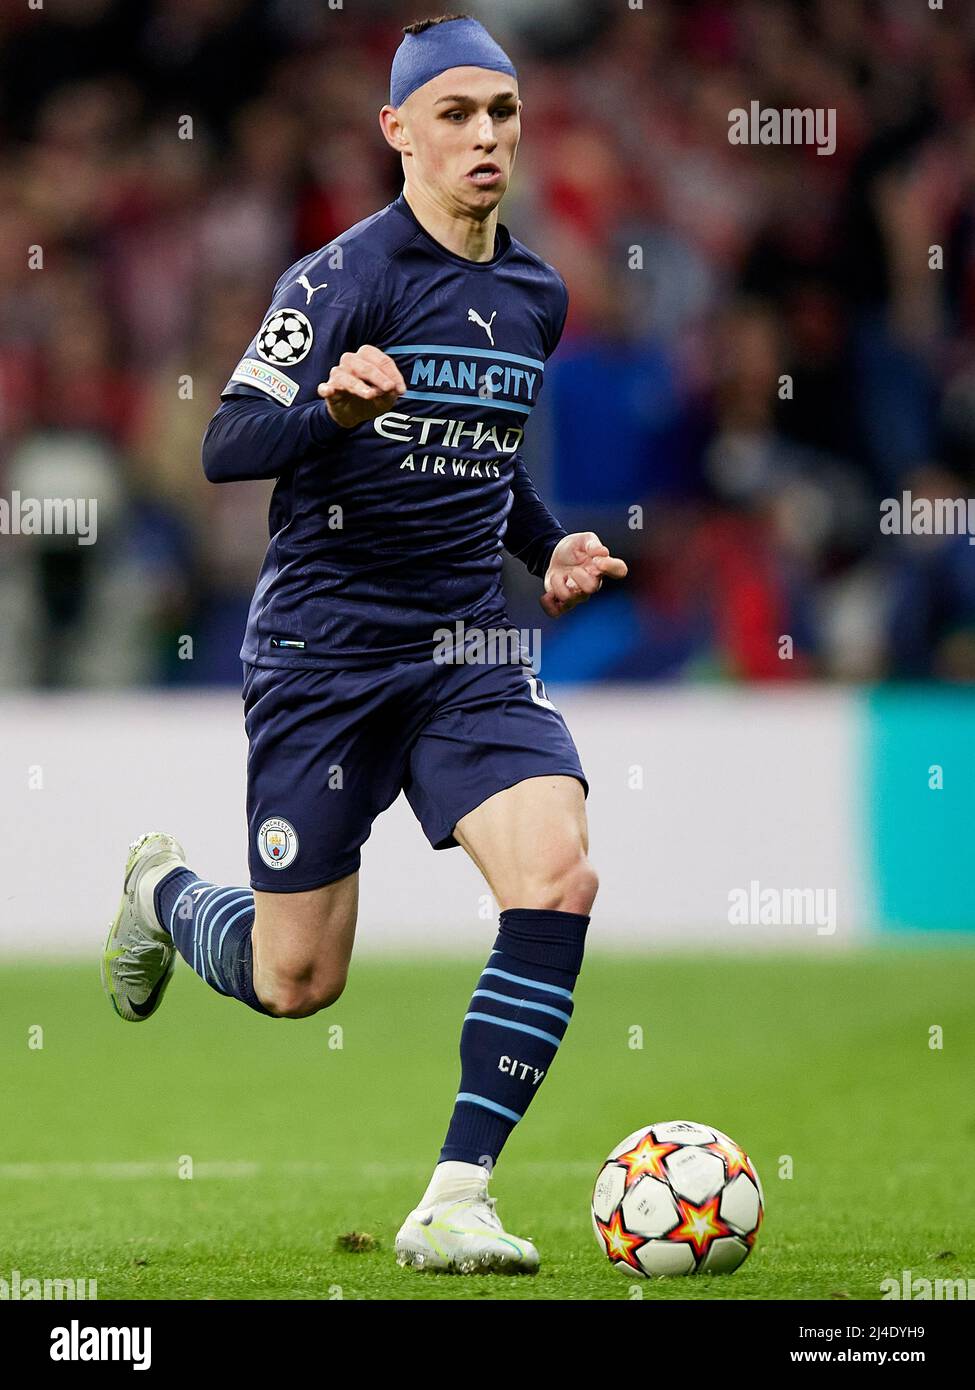 Phil Foden of Manchester City   during the UEFA Champions League match, Quarter Final, Second Leg, between Atletico de Madrid and Manchester City played at Wanda Metropolitano Stadium on April 13, 2022 in Madrid, Spain. (Photo by Ruben Albarran / PRESSINPHOTO) Stock Photo